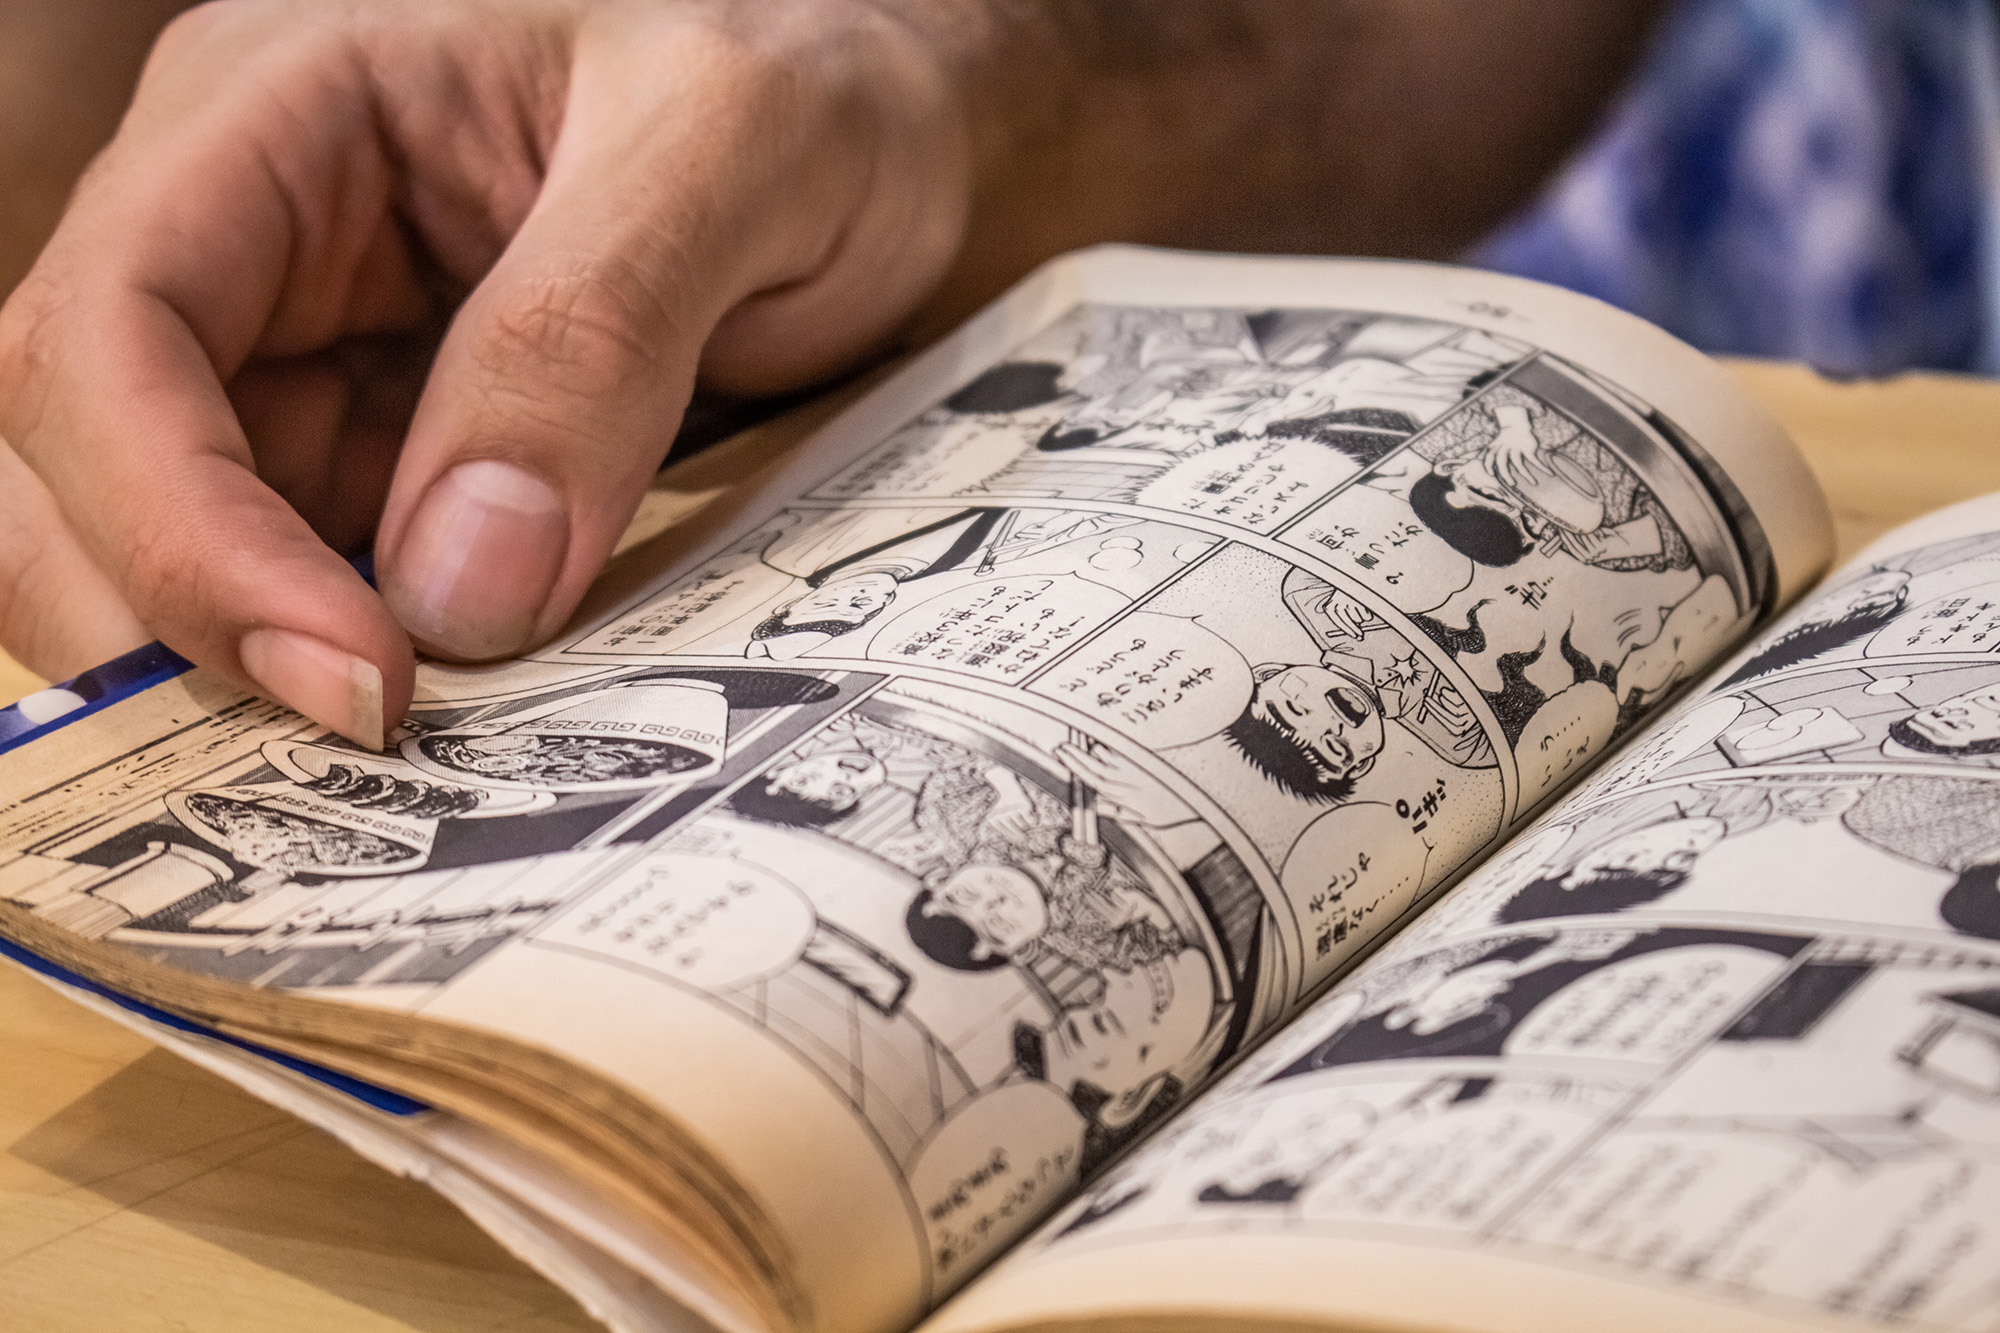 A graphic novel lies on a table, held in one hand